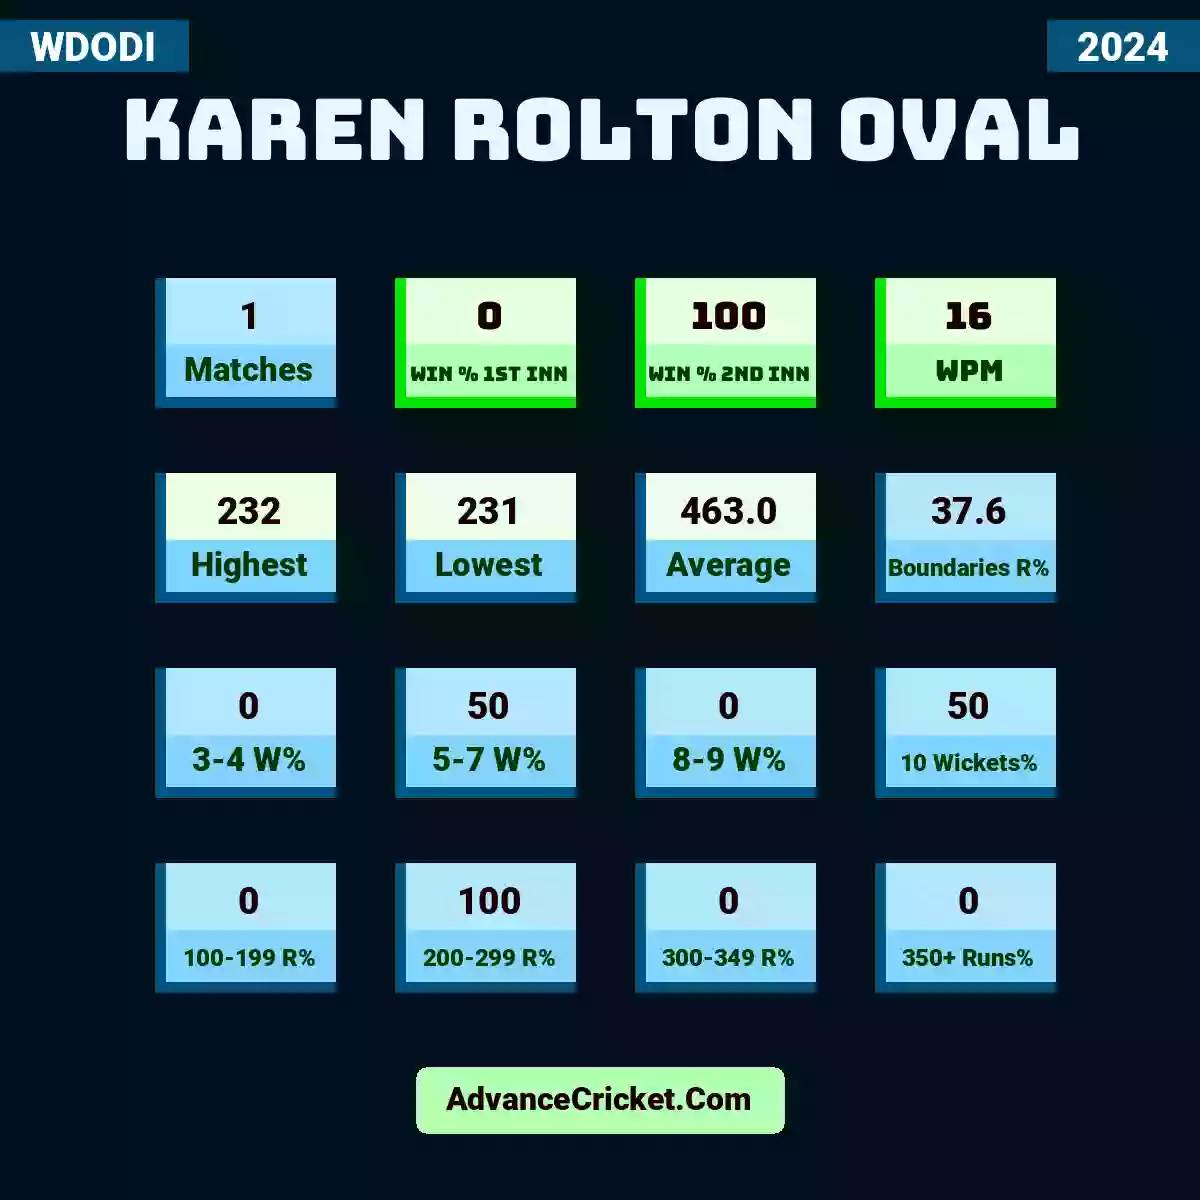 Image showing Karen Rolton Oval with Matches: 1, Win % 1st Inn: 0, Win % 2nd Inn: 100, WPM: 16, Highest: 232, Lowest: 231, Average: 463.0, Boundaries R%: 37.6, 3-4 W%: 0, 5-7 W%: 50, 8-9 W%: 0, 10 Wickets%: 50, 100-199 R%: 0, 200-299 R%: 100, 300-349 R%: 0, 350+ Runs%: 0.